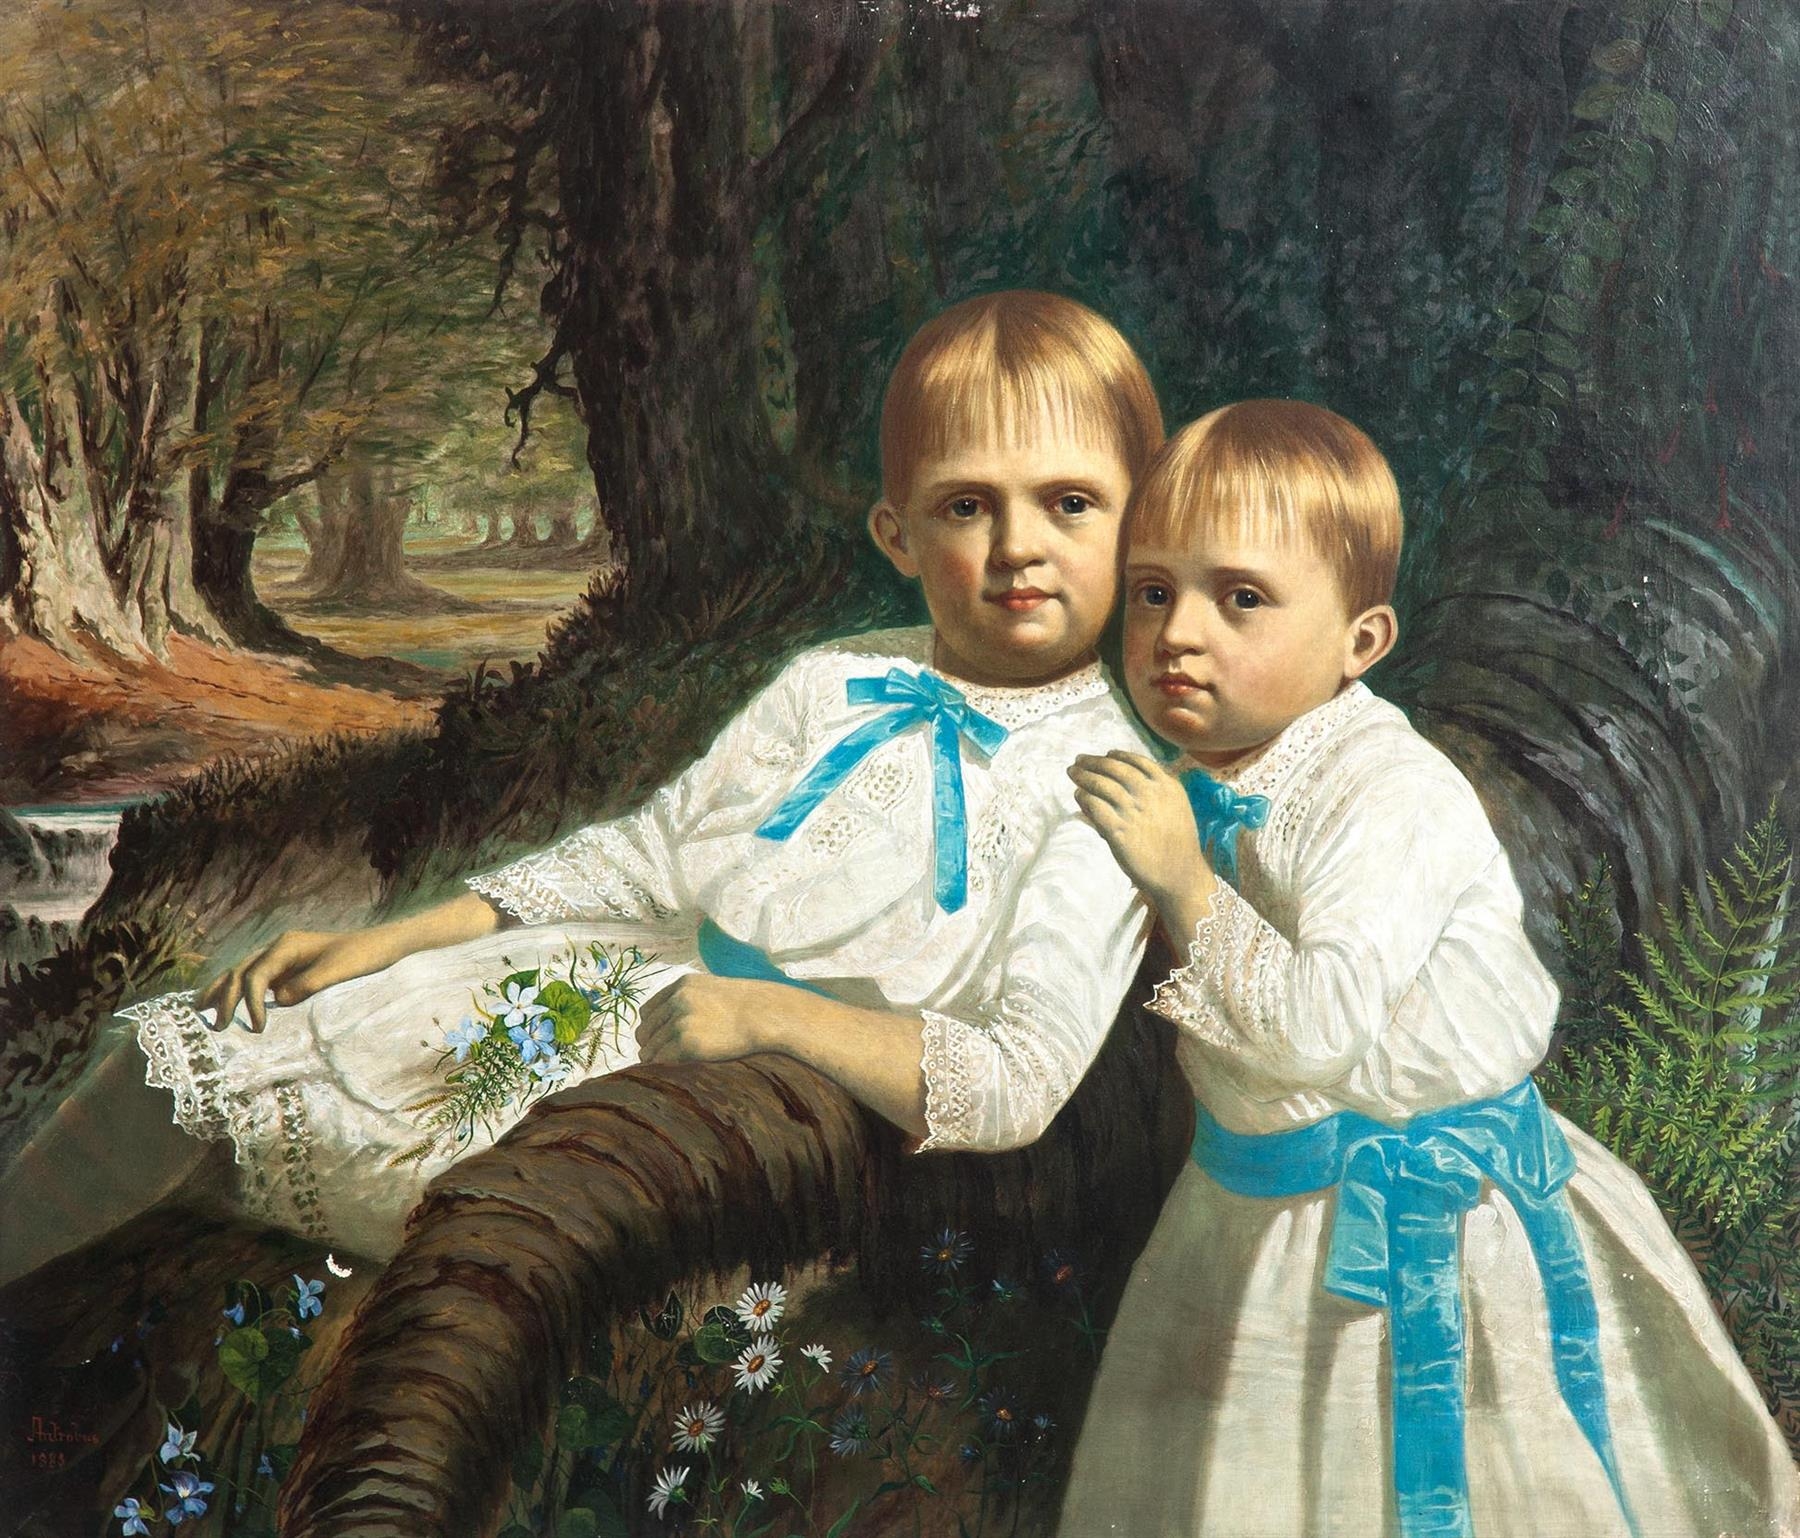 Artwork by John Antrobus, Two Children, Made of Oil on canvas